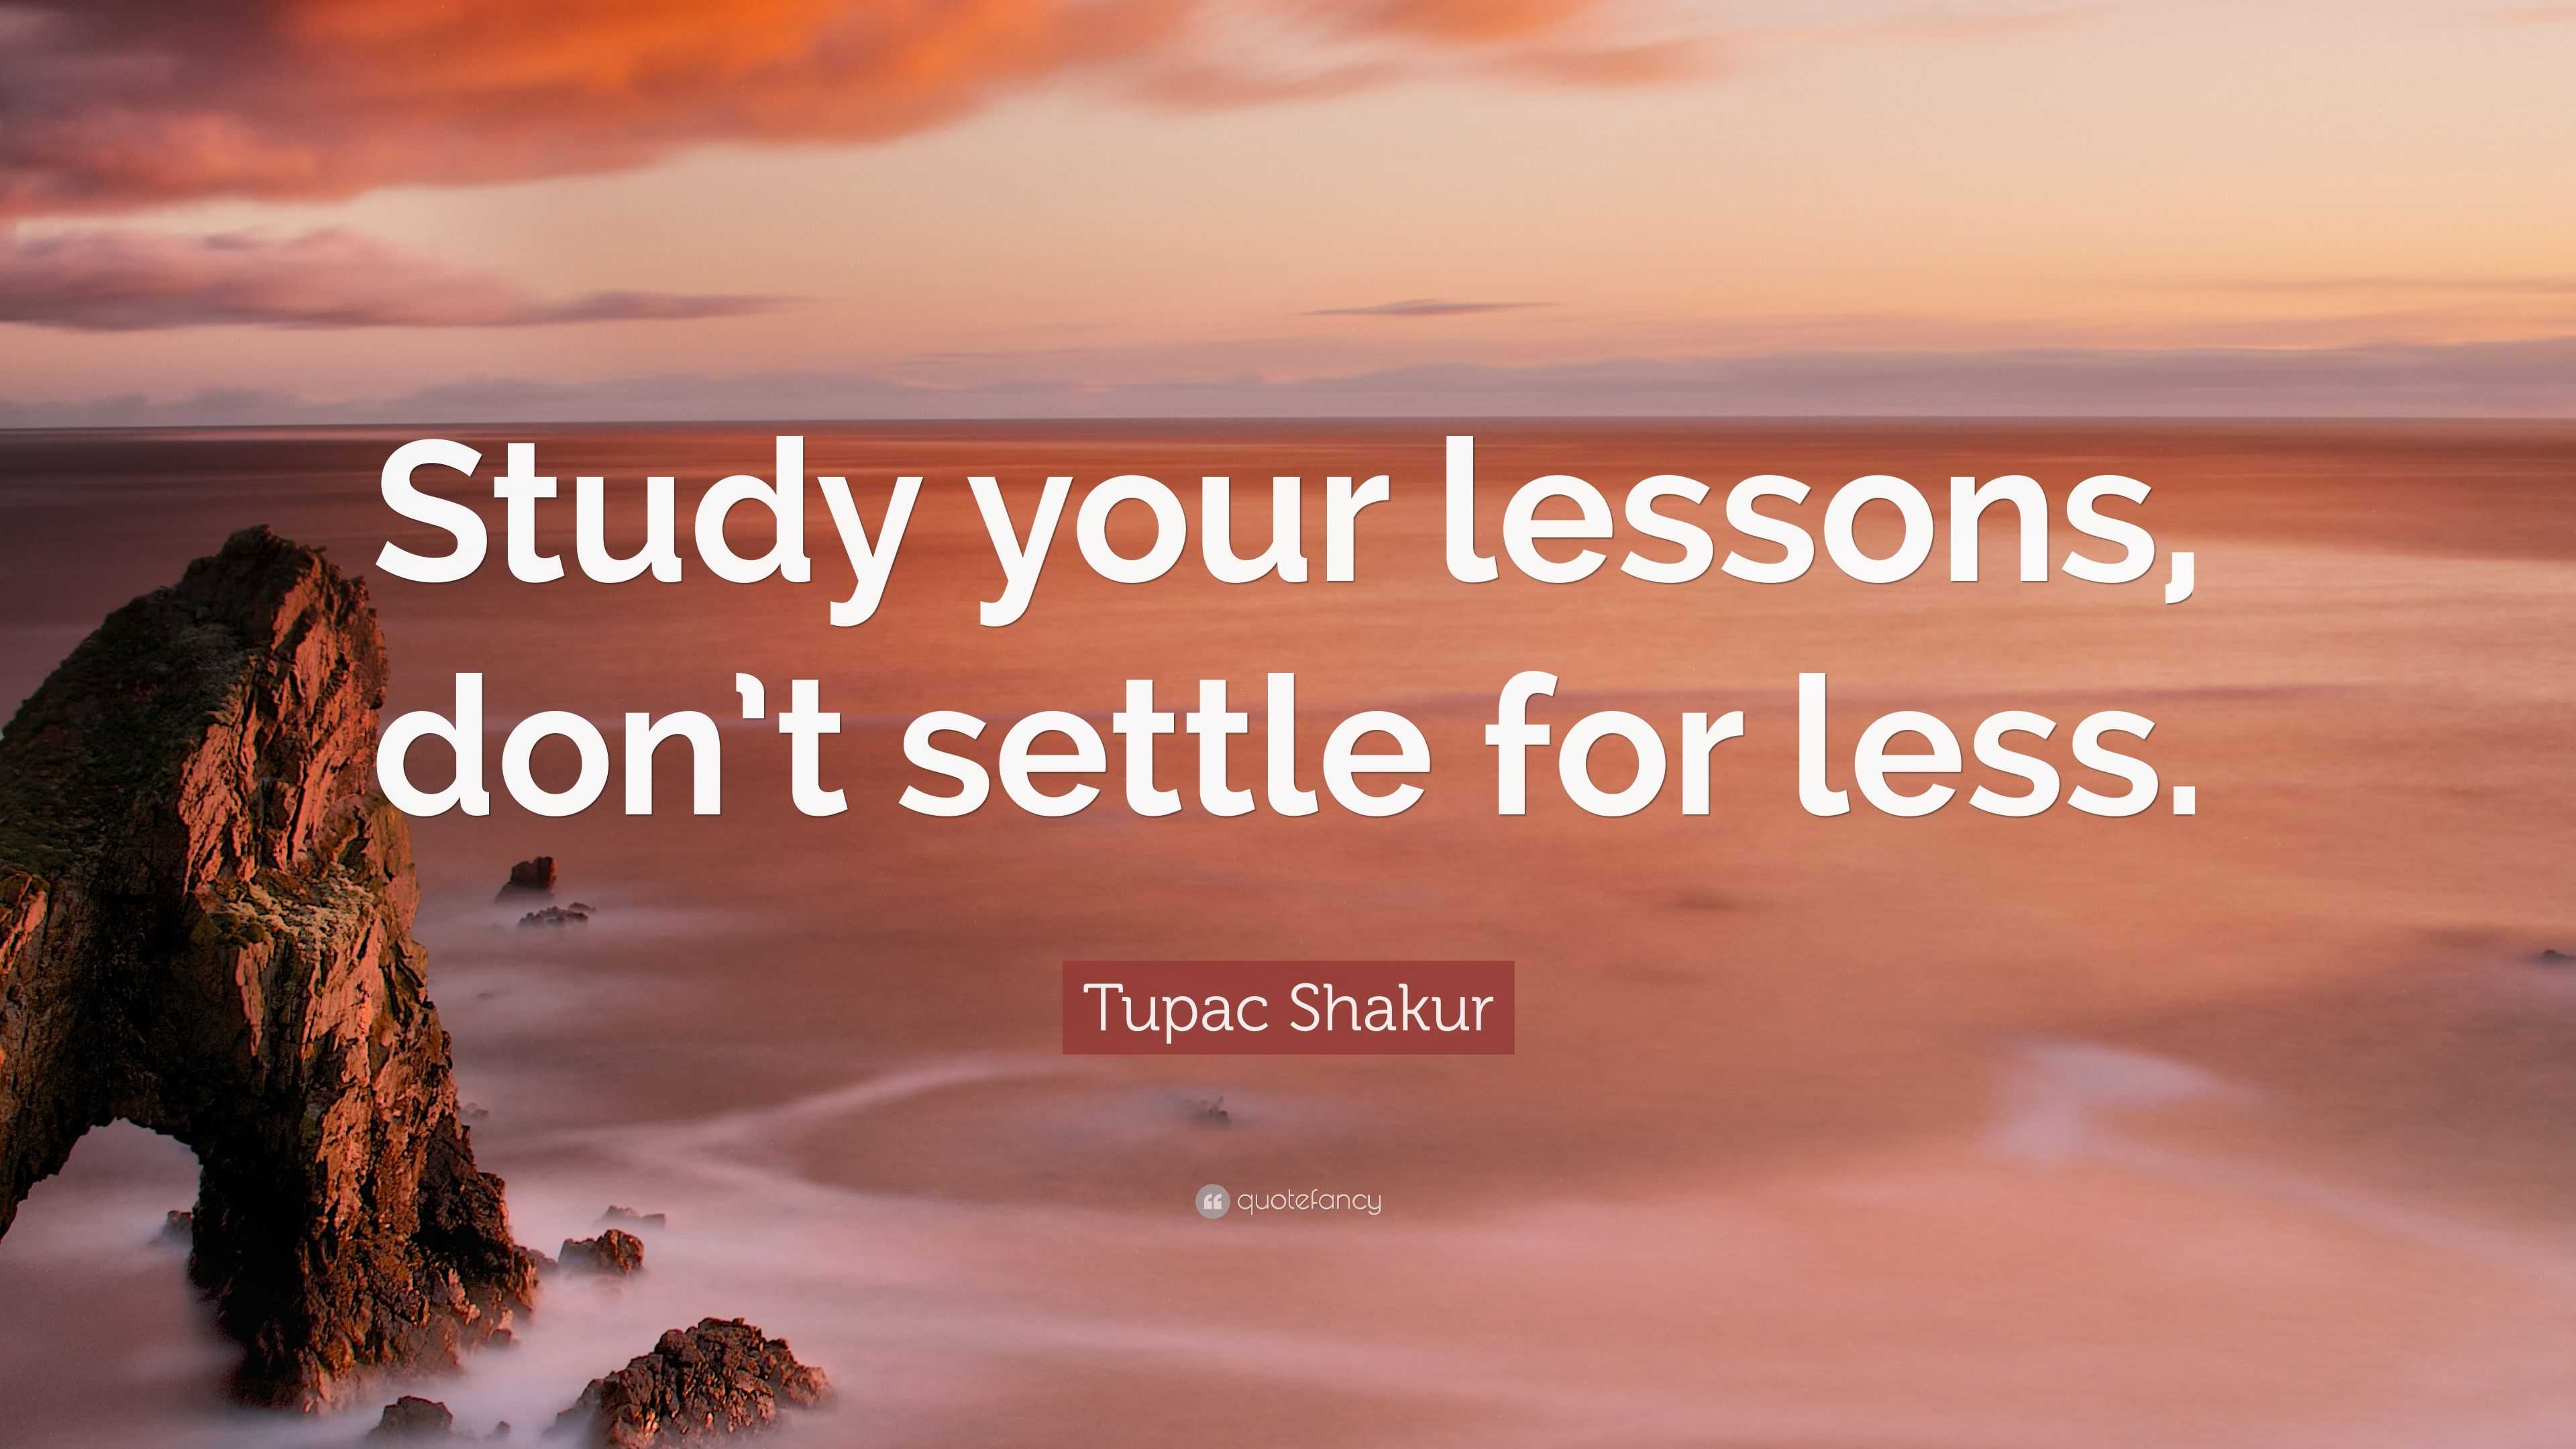 Tupac Shakur Quote “Study your lessons, don’t settle for less.”